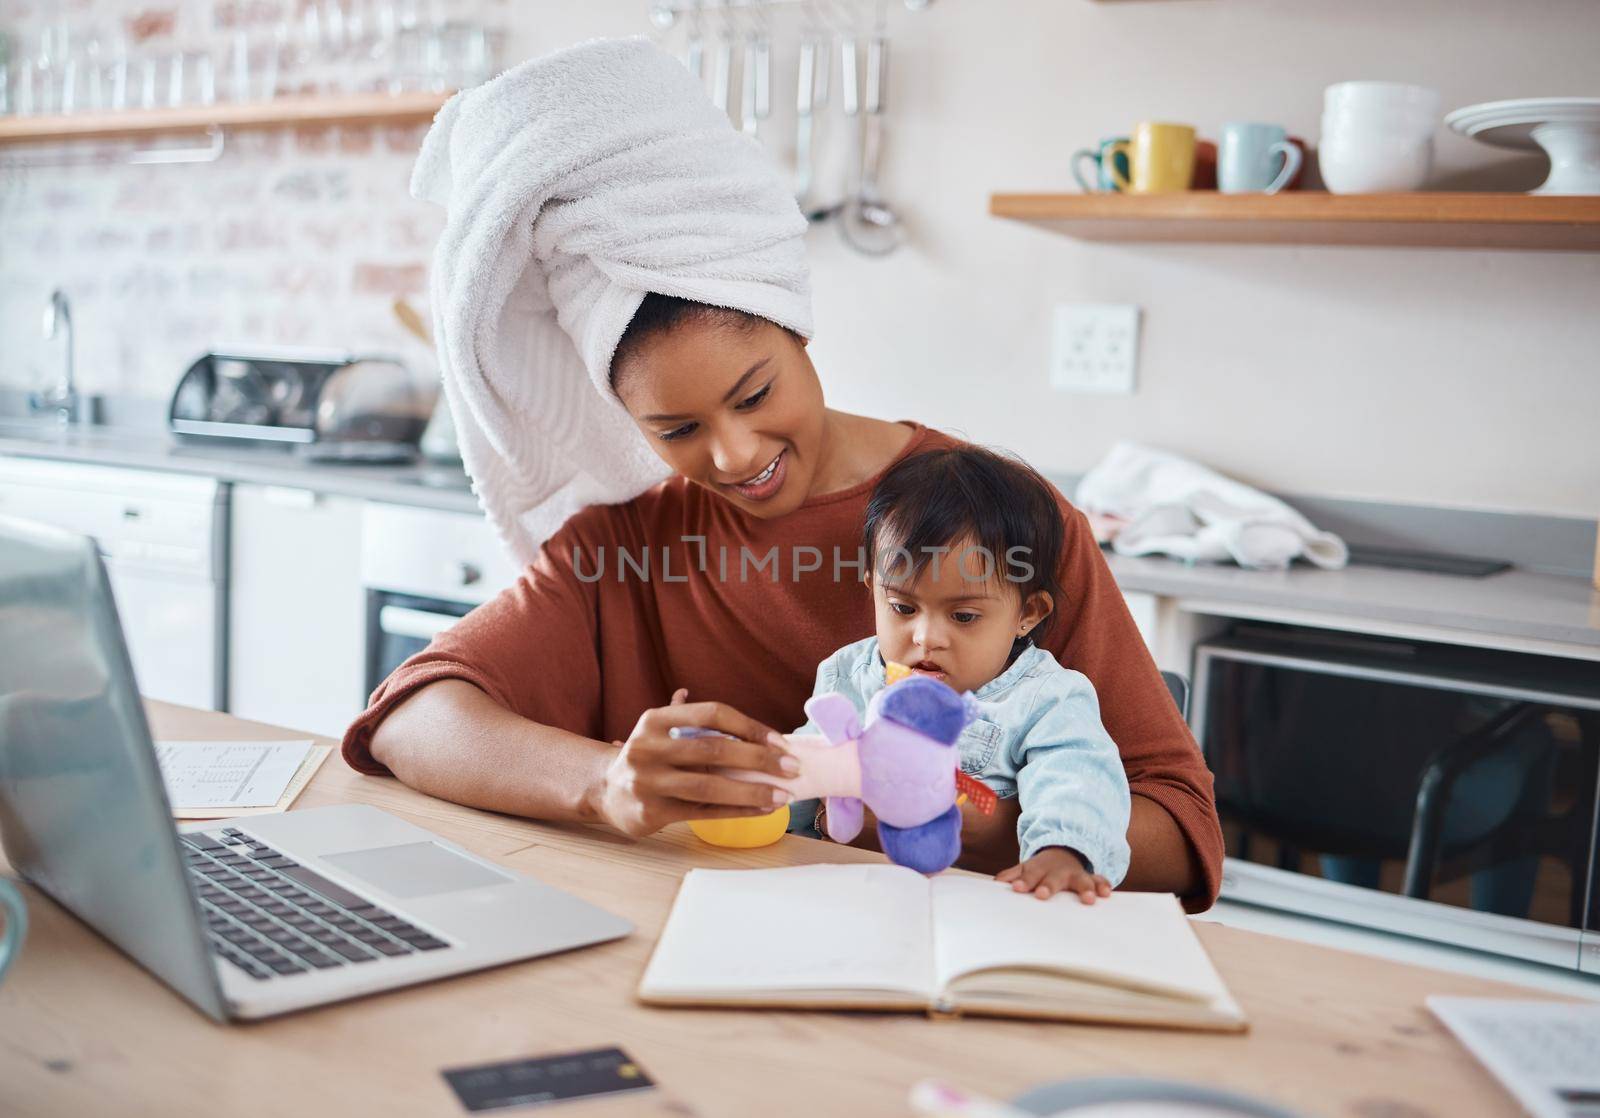 Mother, baby and down syndrome with laptop for work on web, study or education in house. Multitasking, mom and child with computer, book and toys for learning, play and working while home in kitchen.